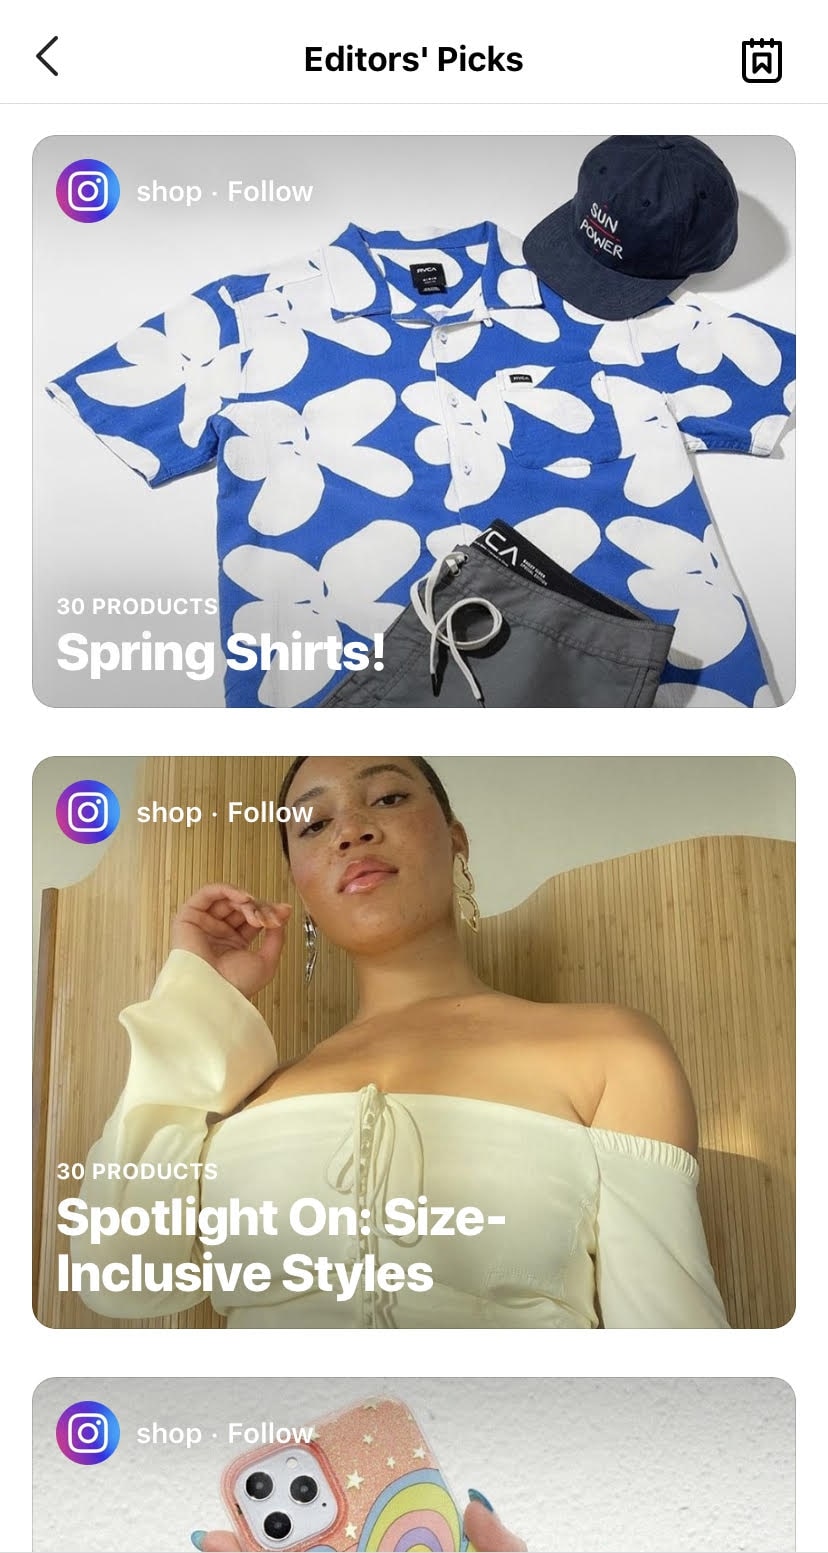 Instagram Shop makes it easy for customers to discover products for sale.